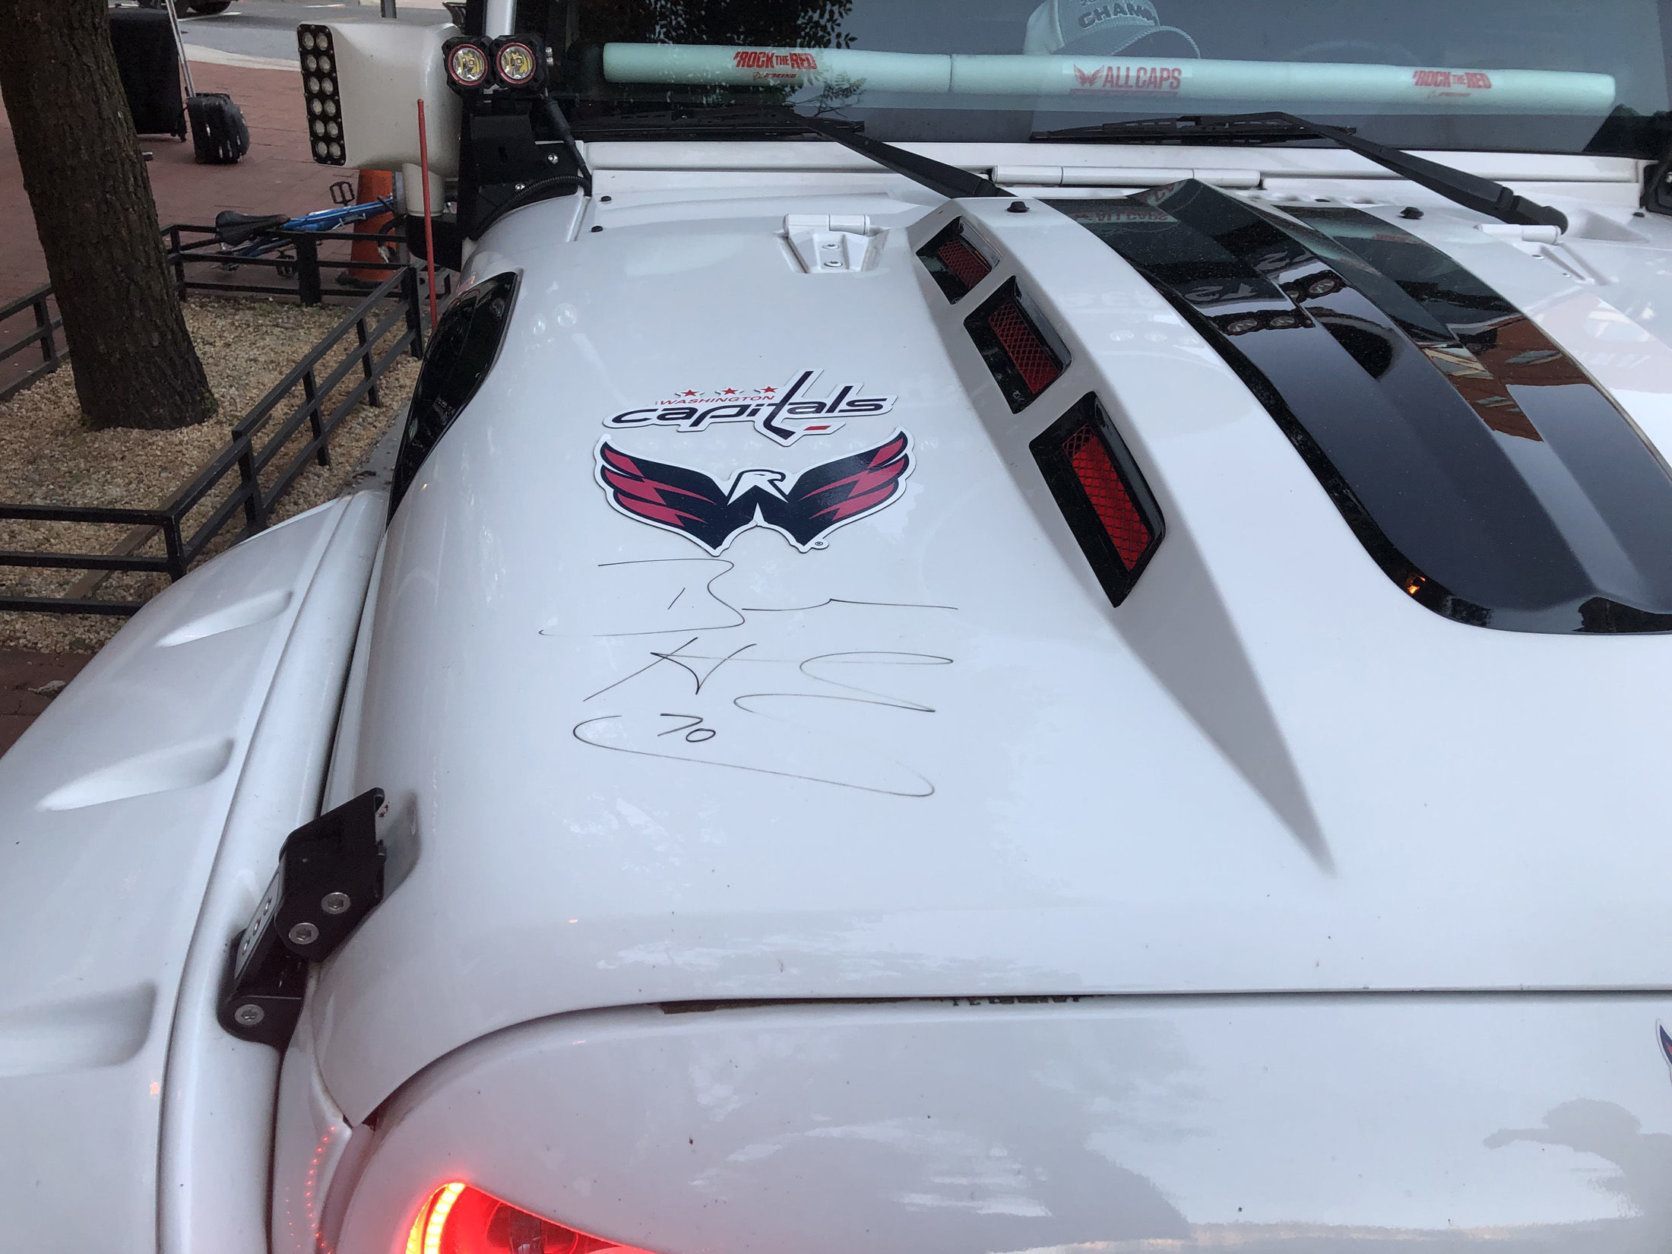 What's a Holtbeast without Braden Holtby's autograph? (WTOP/Mike Murillo)